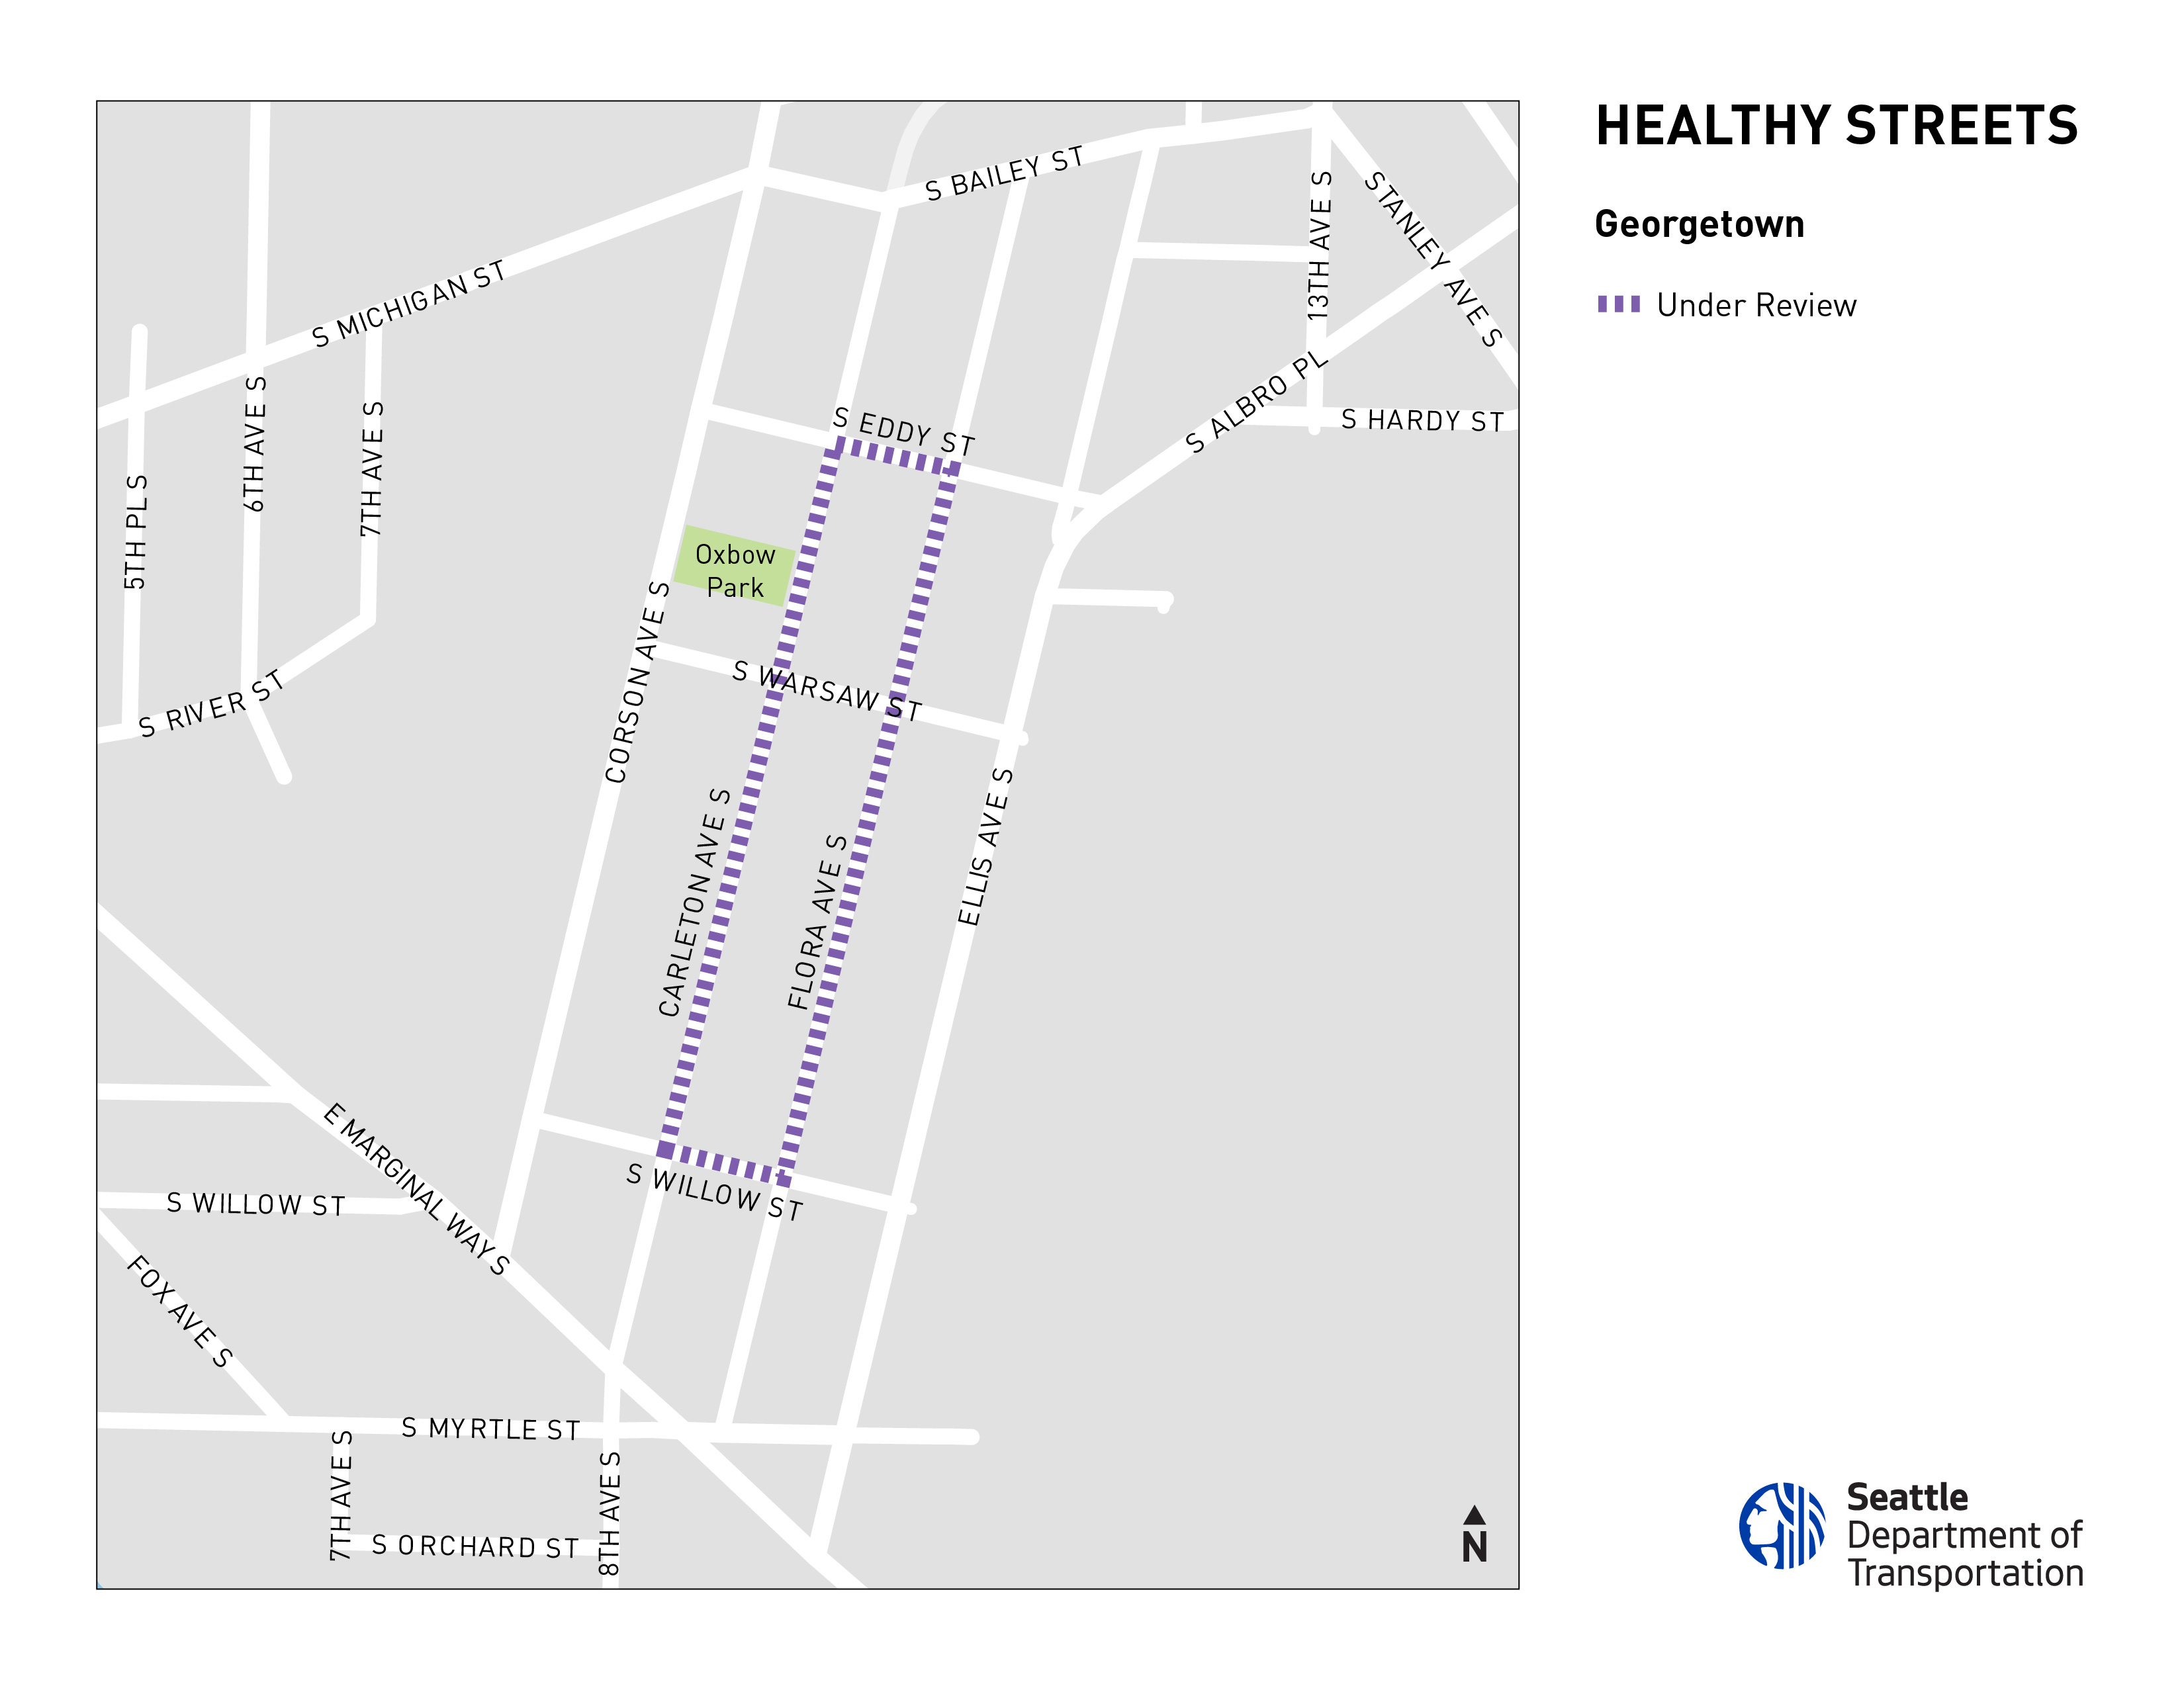 a map showing Healthy Street locations in Georgetown currently under review: on Carleton Ave South and Flora Ave South between South Willow and South Eddy streets